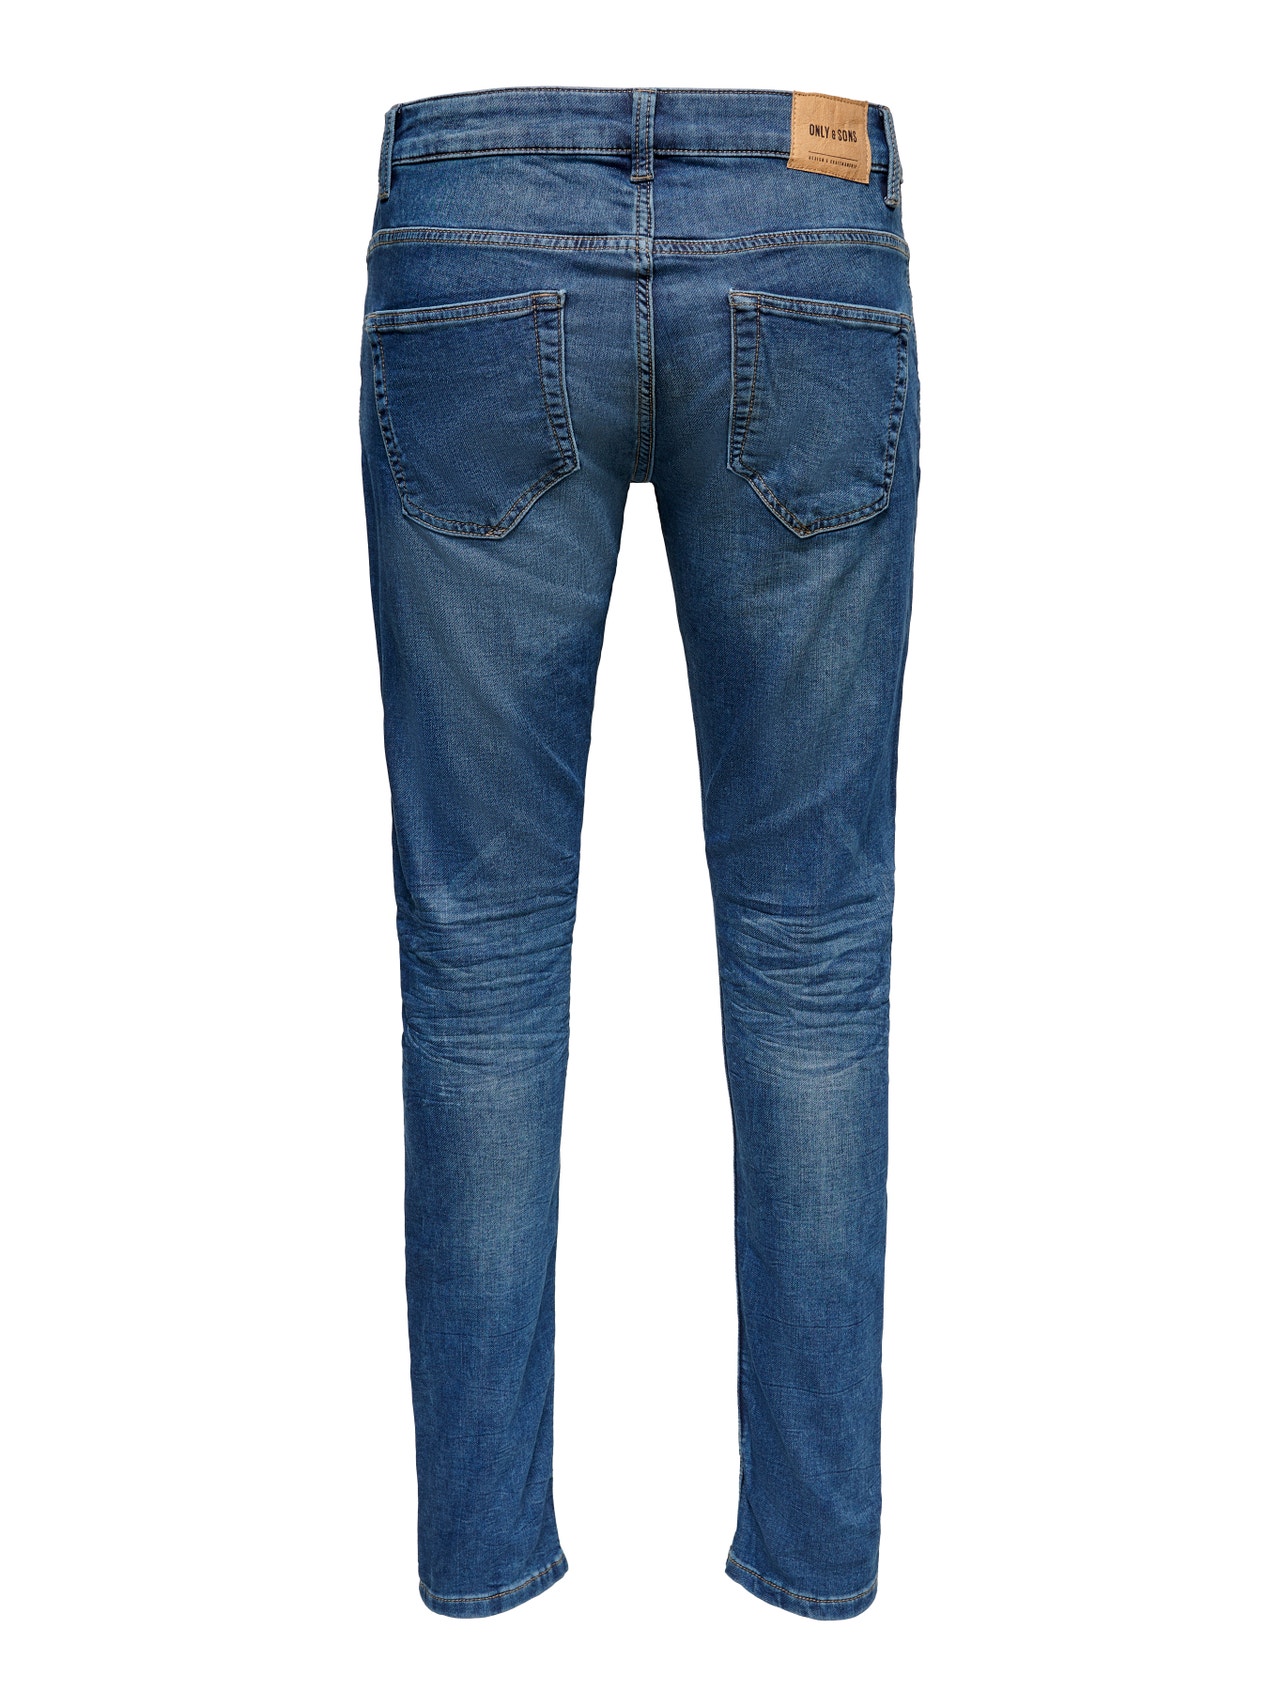 ONLY & SONS Slim Fit Mid rise Jeans -Blue Denim - 22008472